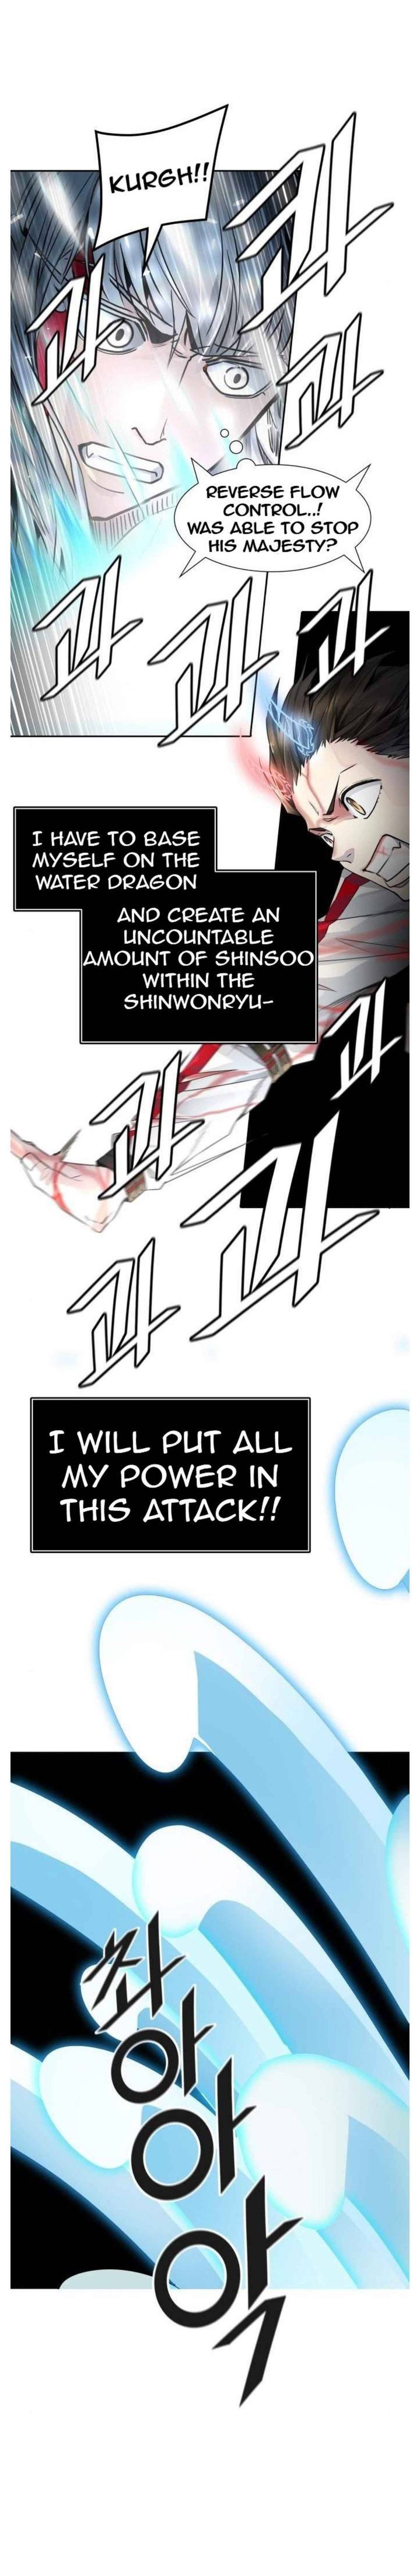 Tower Of God 505 22